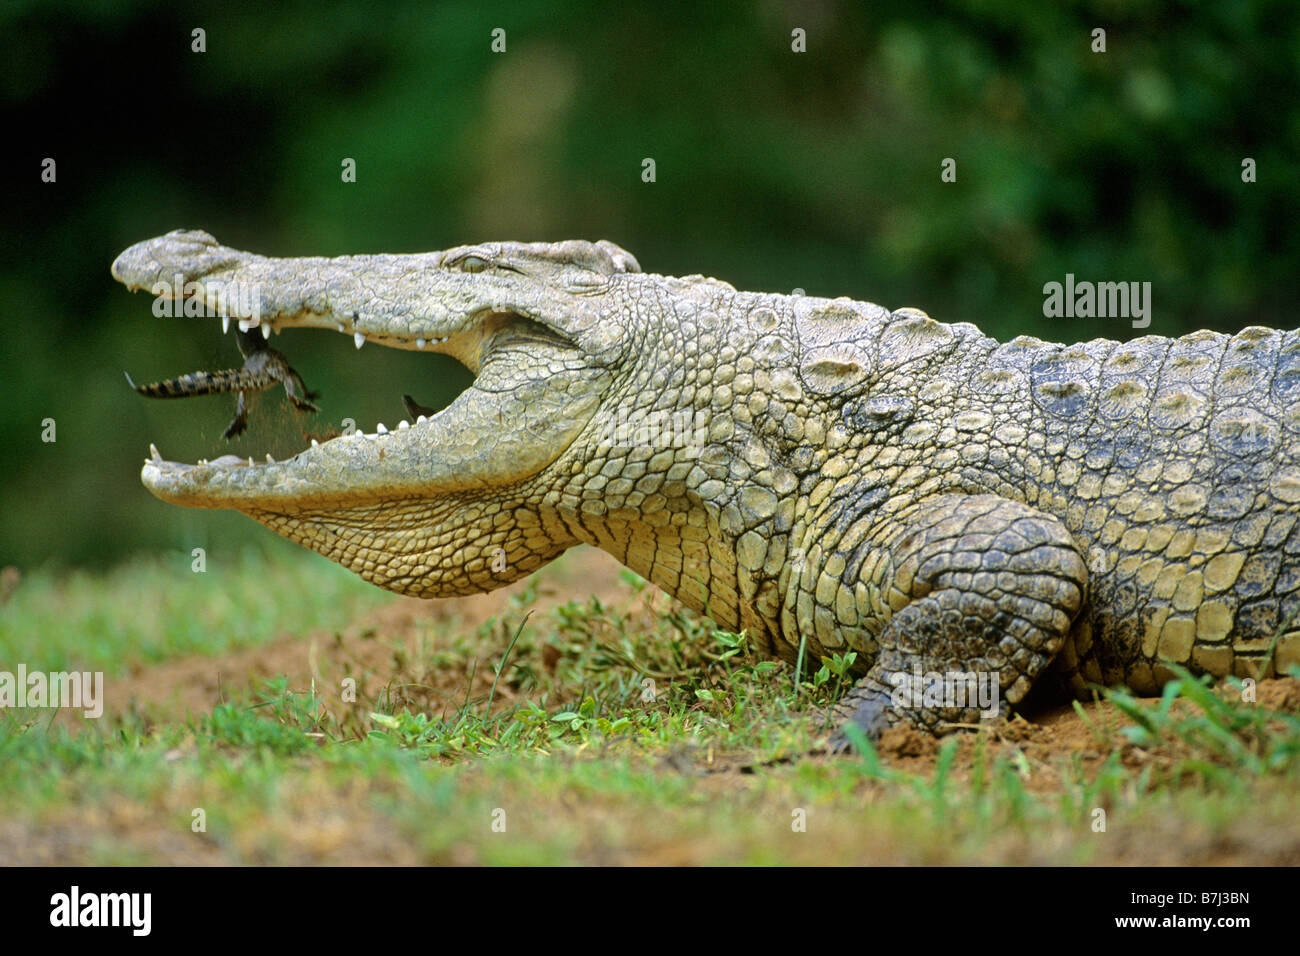 Nile Crocodile (Crocodylus niloticus). Female throwing young into its mouth in order to carry it to the water Stock Photo